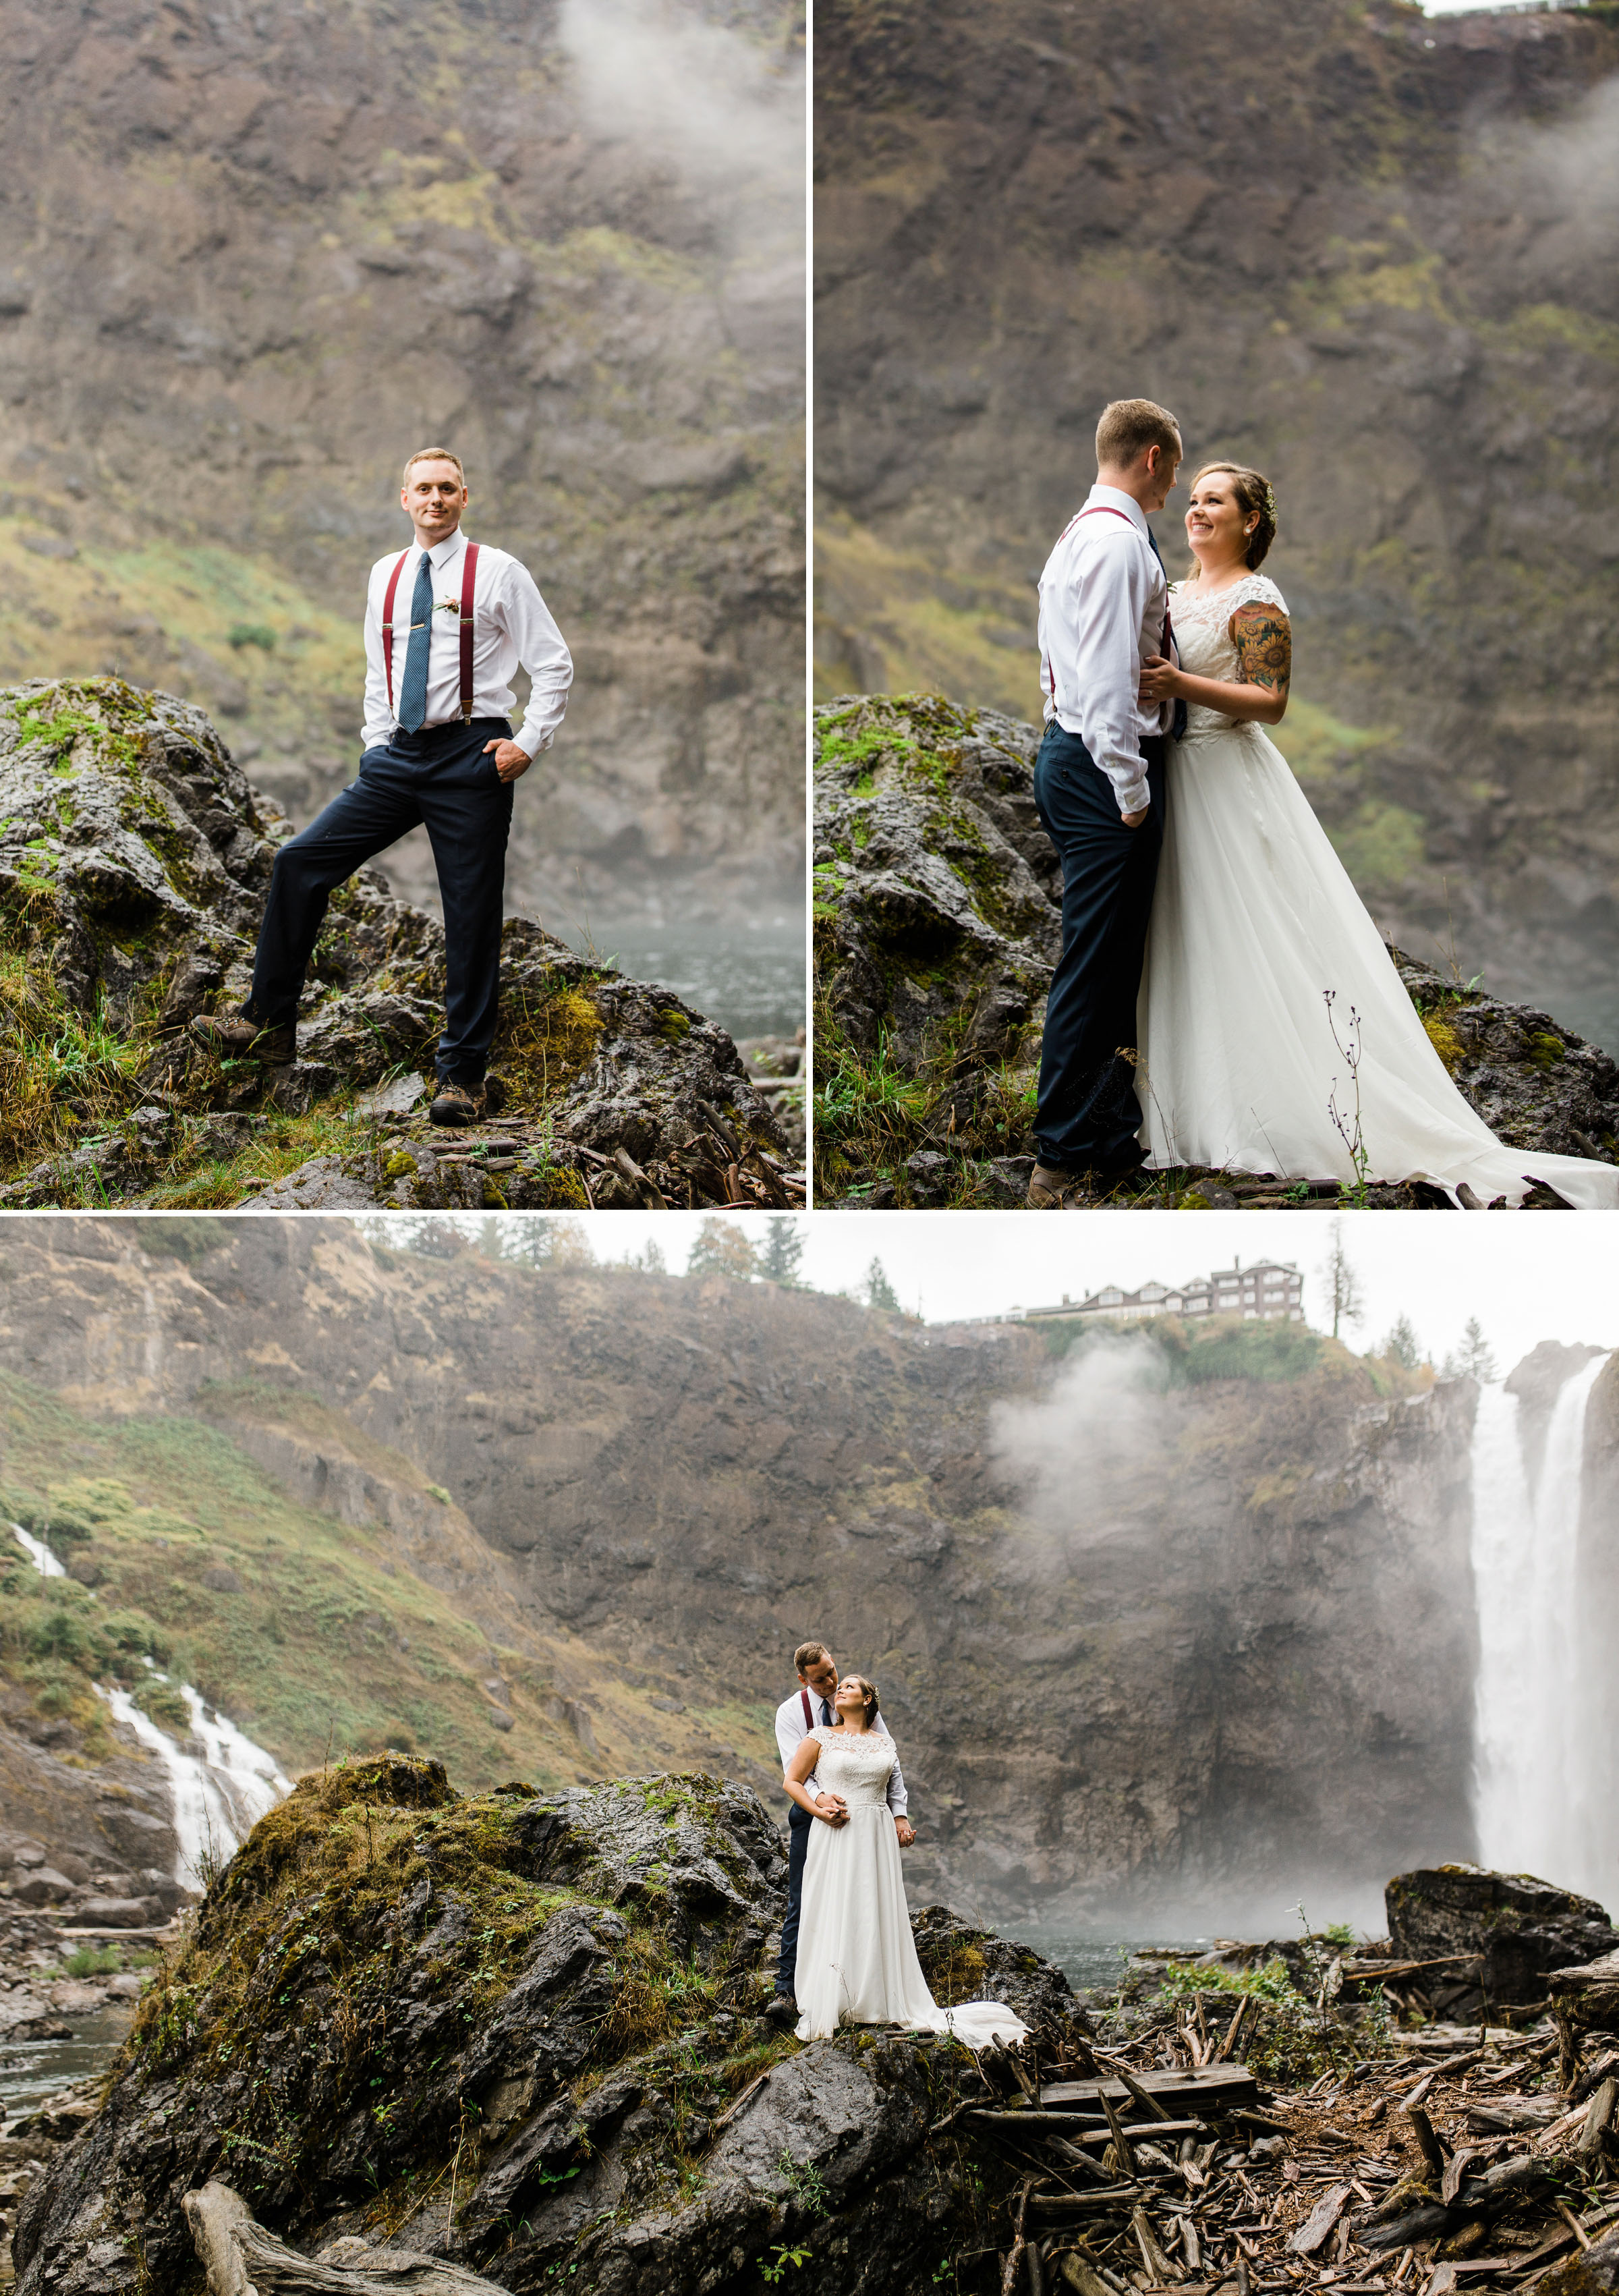 17-Seattle-Elopement-Photographer-Snoqualmie-Pass-Water-Falls-Hiking-Adventure-Wedding-Photography